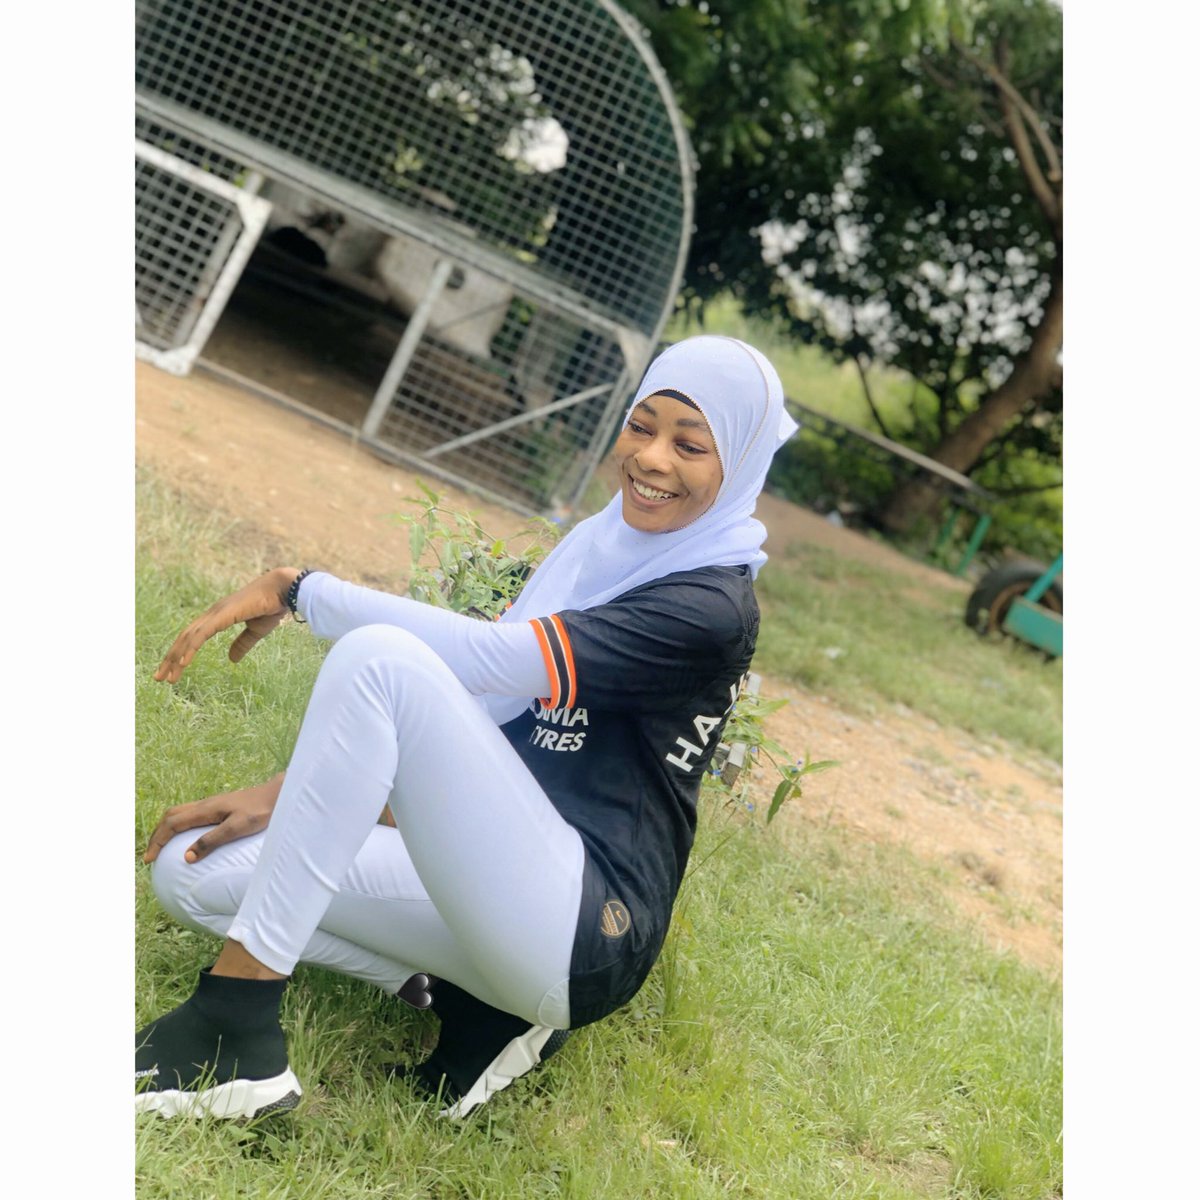 Thanks be to the Almighty Allah for granting me this priceless gift of adding another year to my age.I’m forever grateful.Happy birthday 🎂 to me.Still the blues for life 🙏🏼💙🔥💯😊 #Queen 💎🧕💜